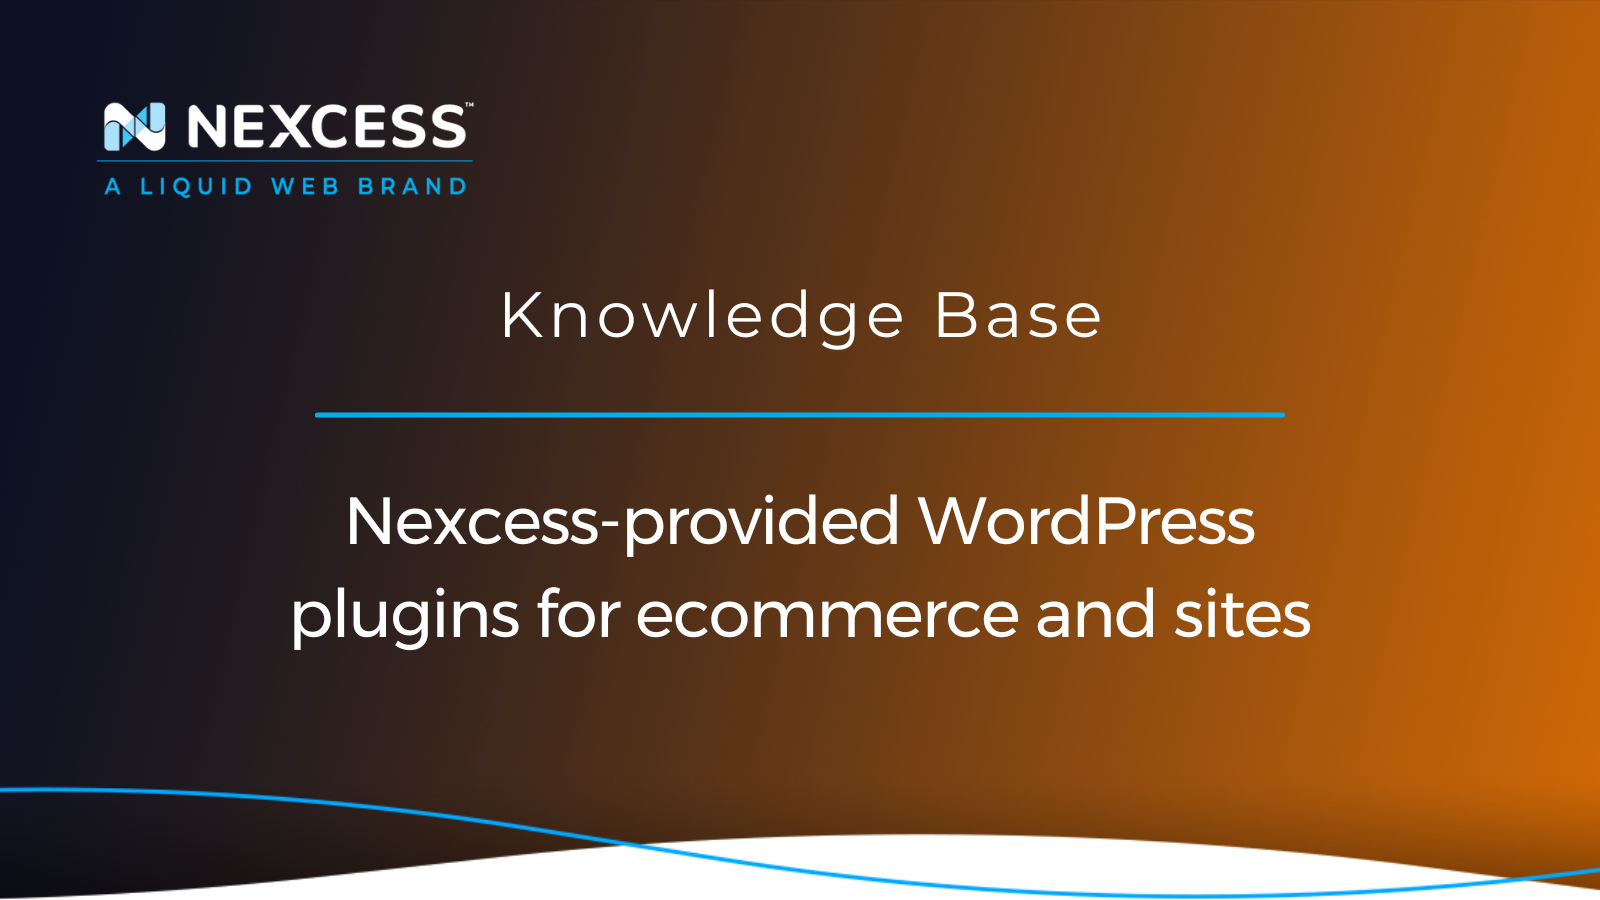 Nexcess-provided WordPress plugins for ecommerce and sites